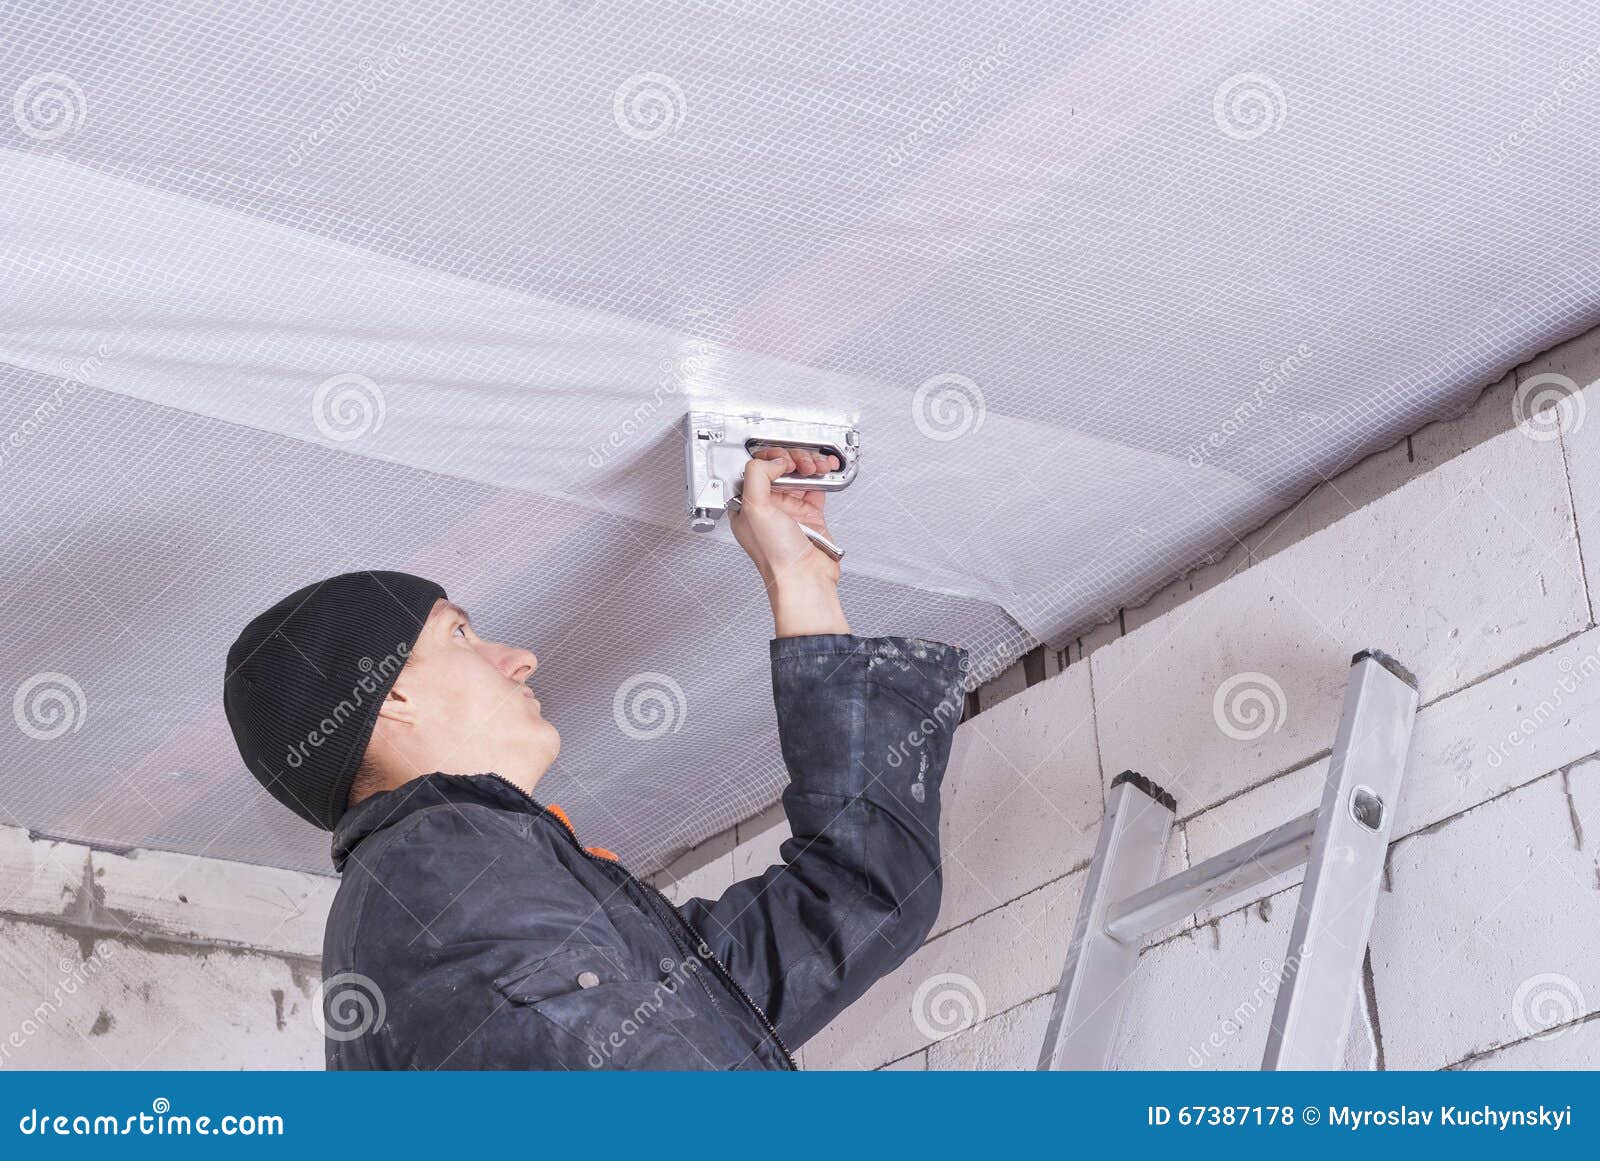 Installation Of A Vapor Barrier Stock Photo Image Of Insulation